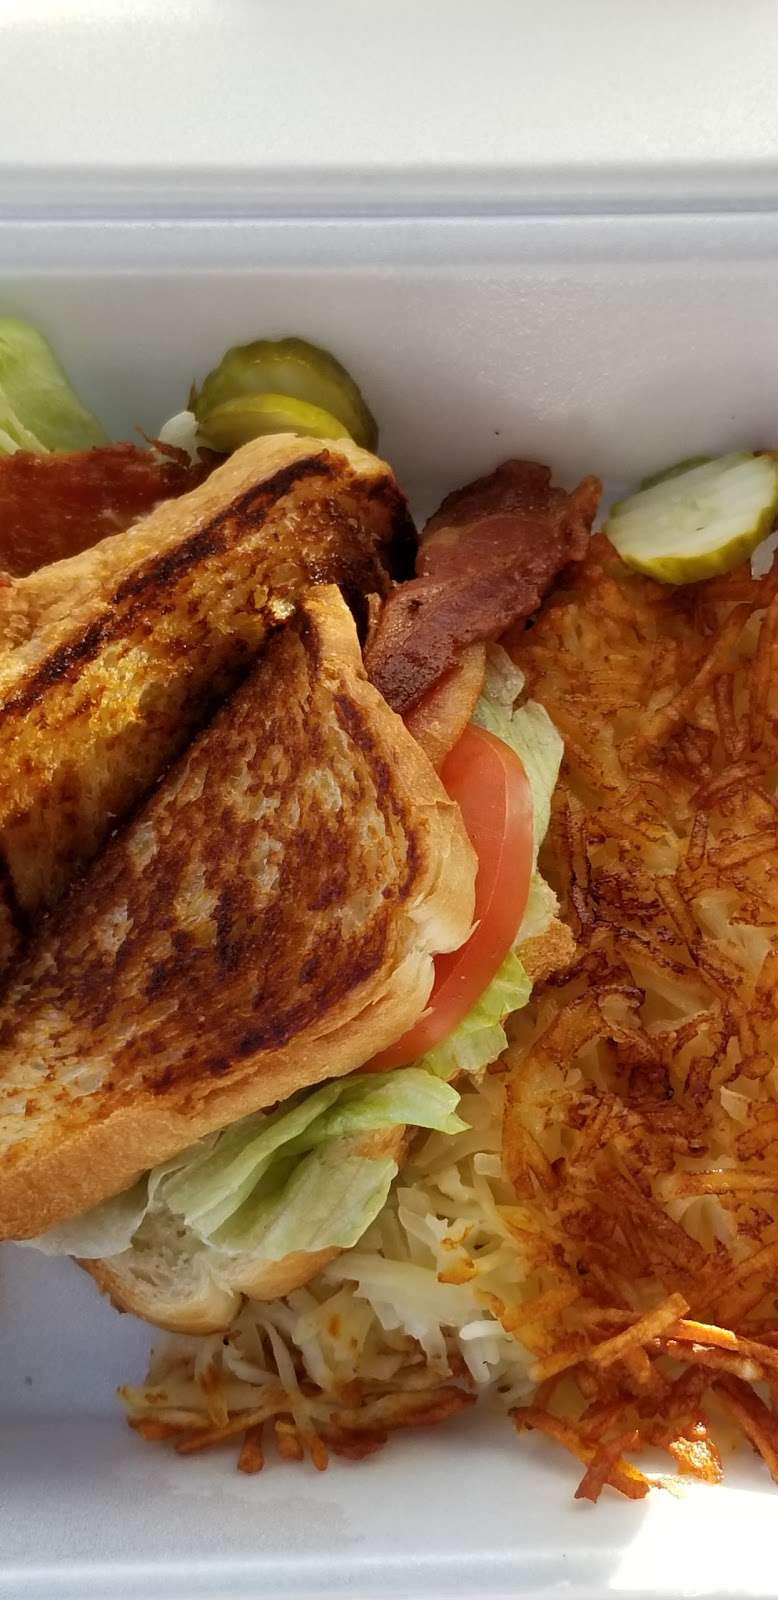 The Knuckle Sandwich | 9500 IN-144, Martinsville, IN 46151 | Phone: (317) 422-5767